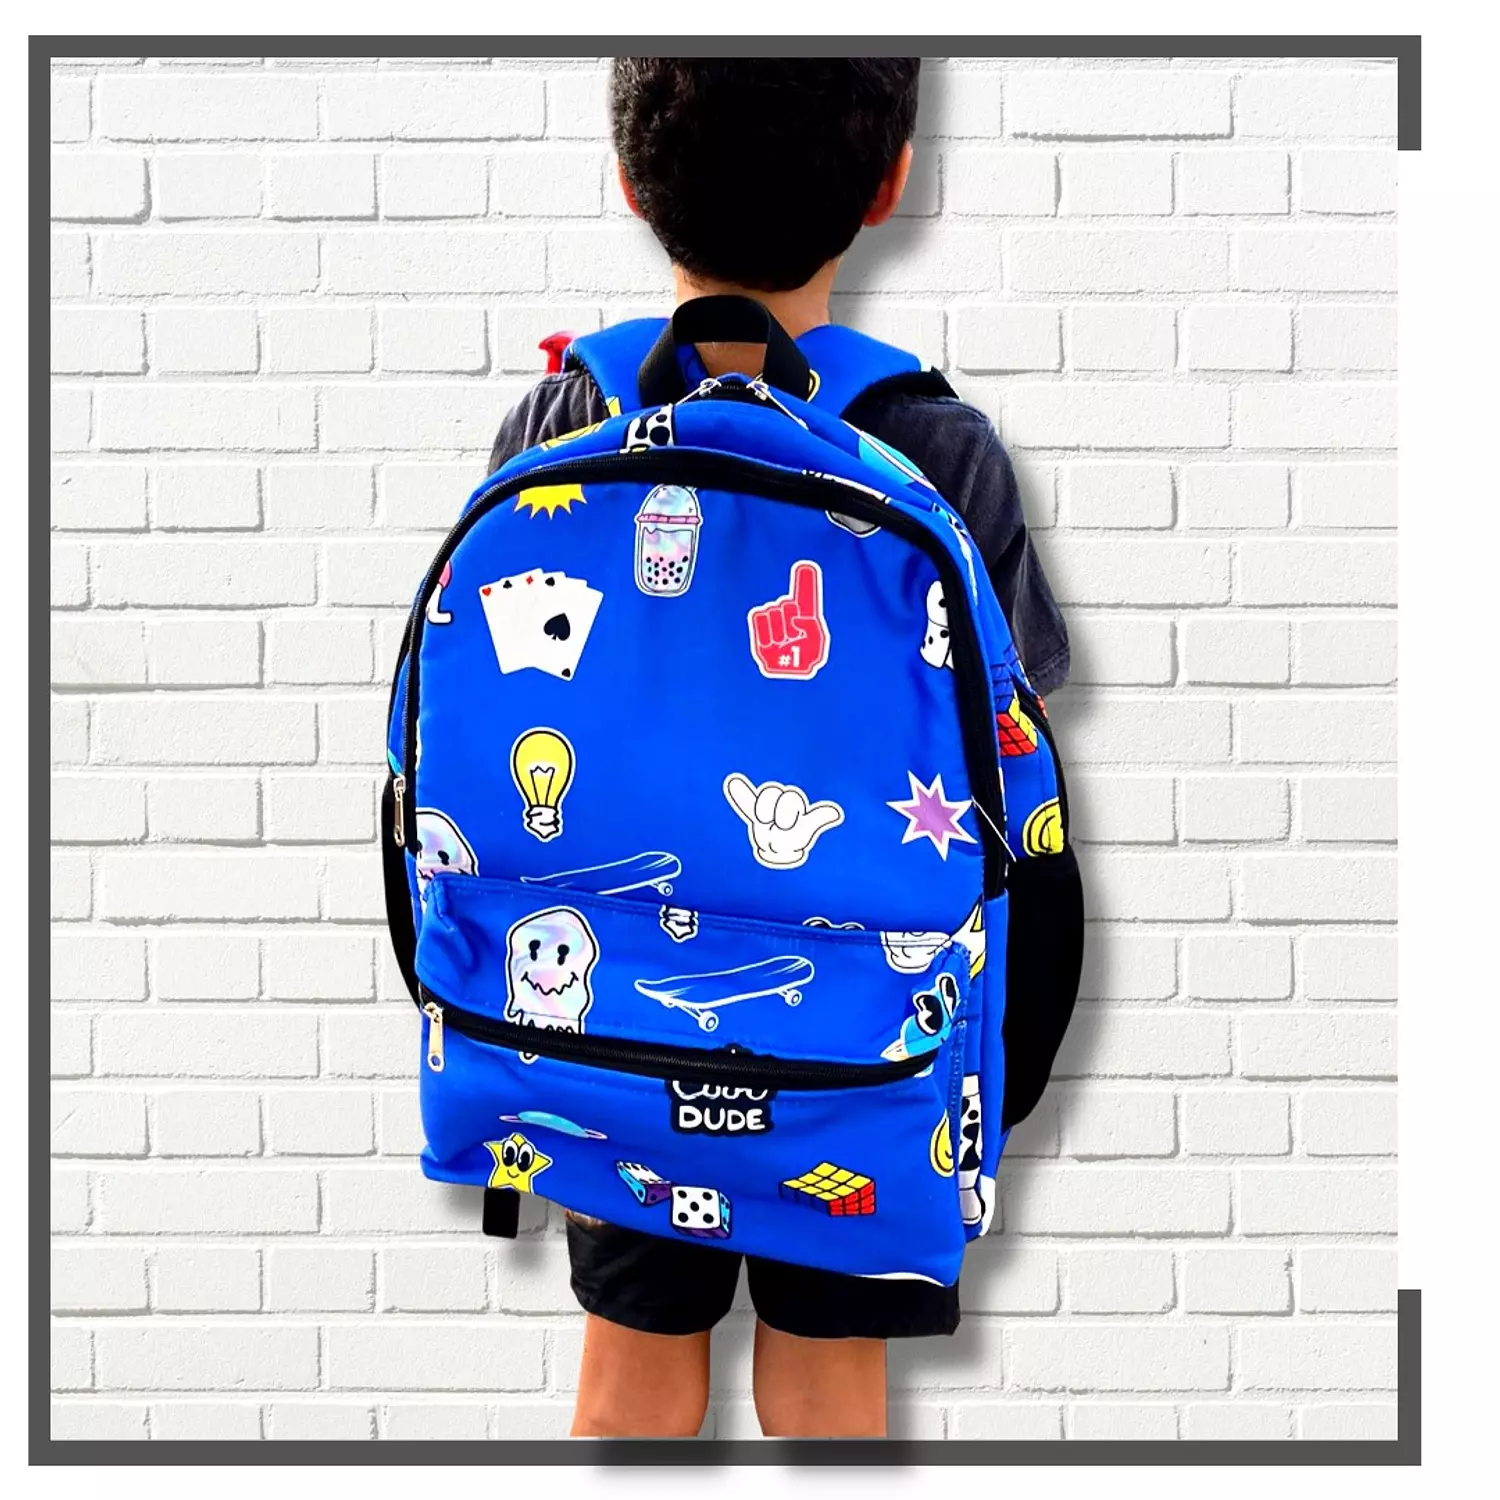 Cool Dude Backpack hover image